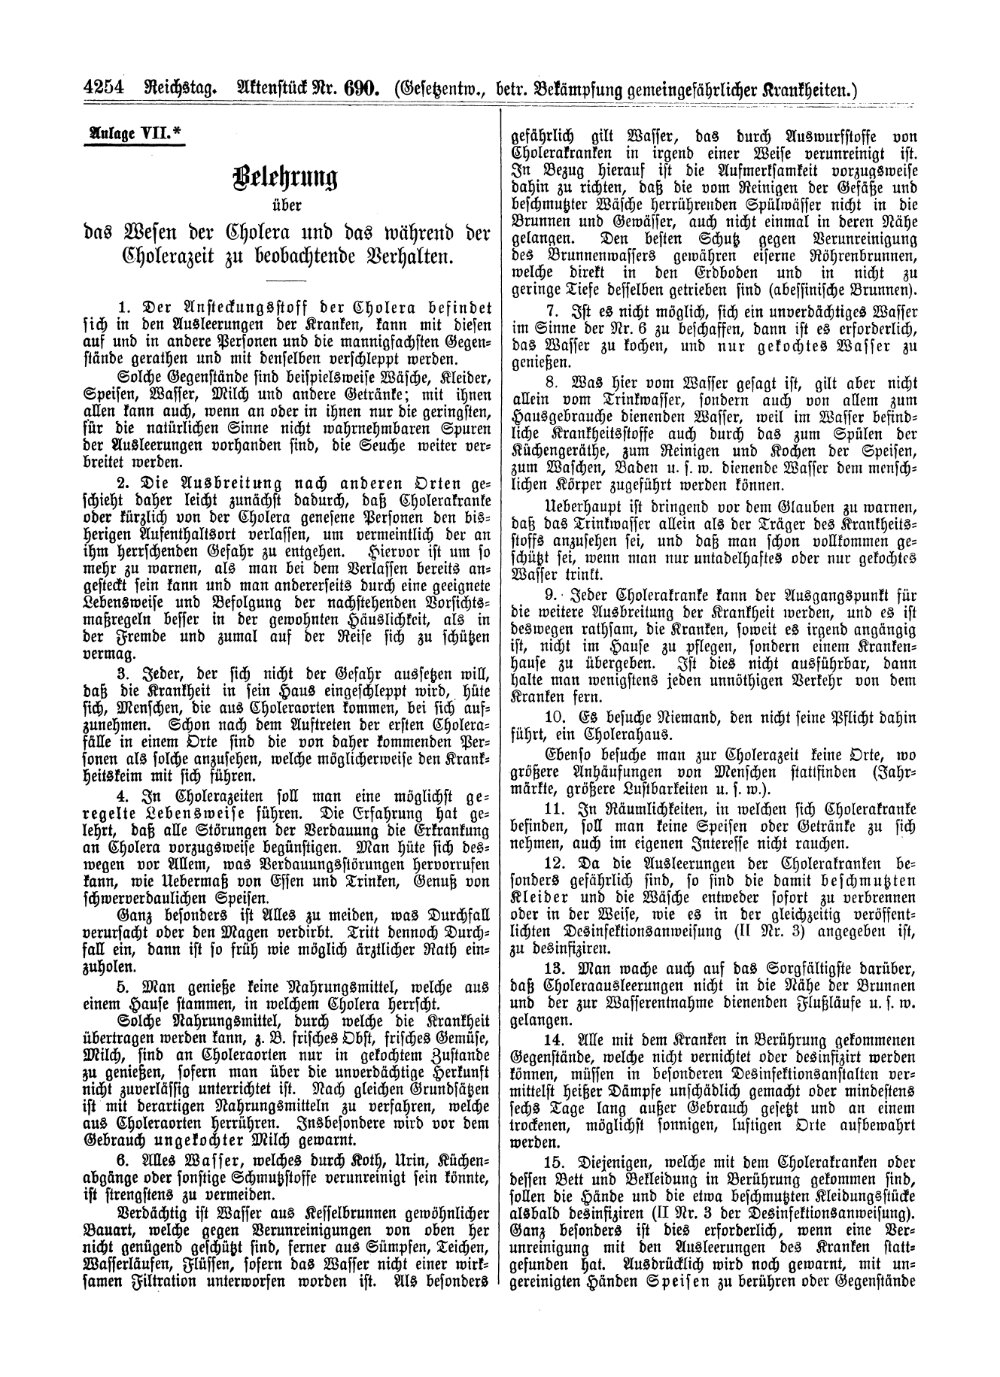 Scan of page 4254